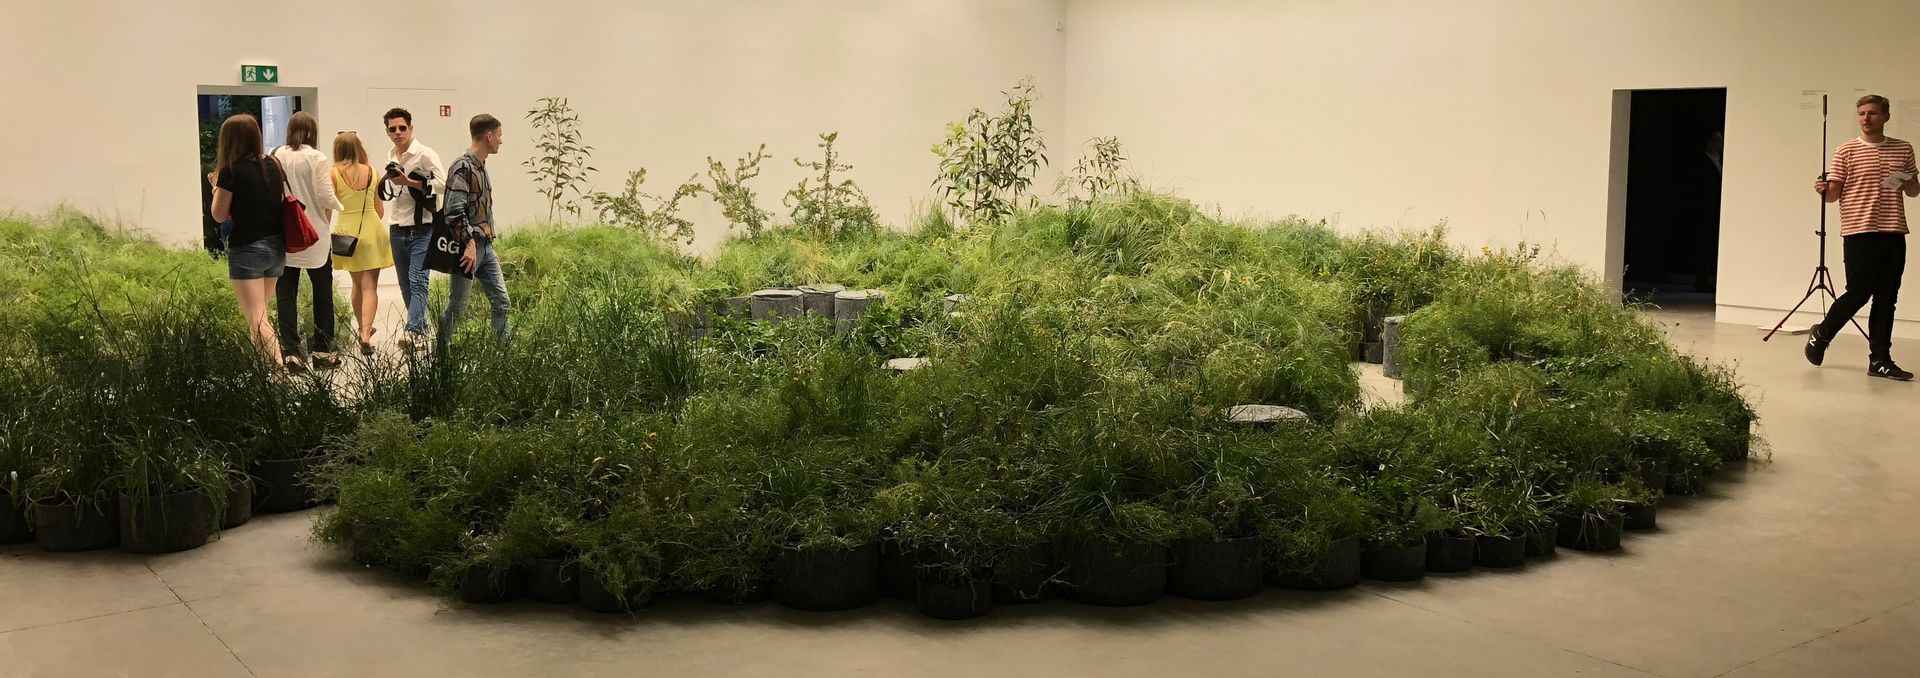 A room inside an art gallery with mounds of grassland plants and people navigating through them